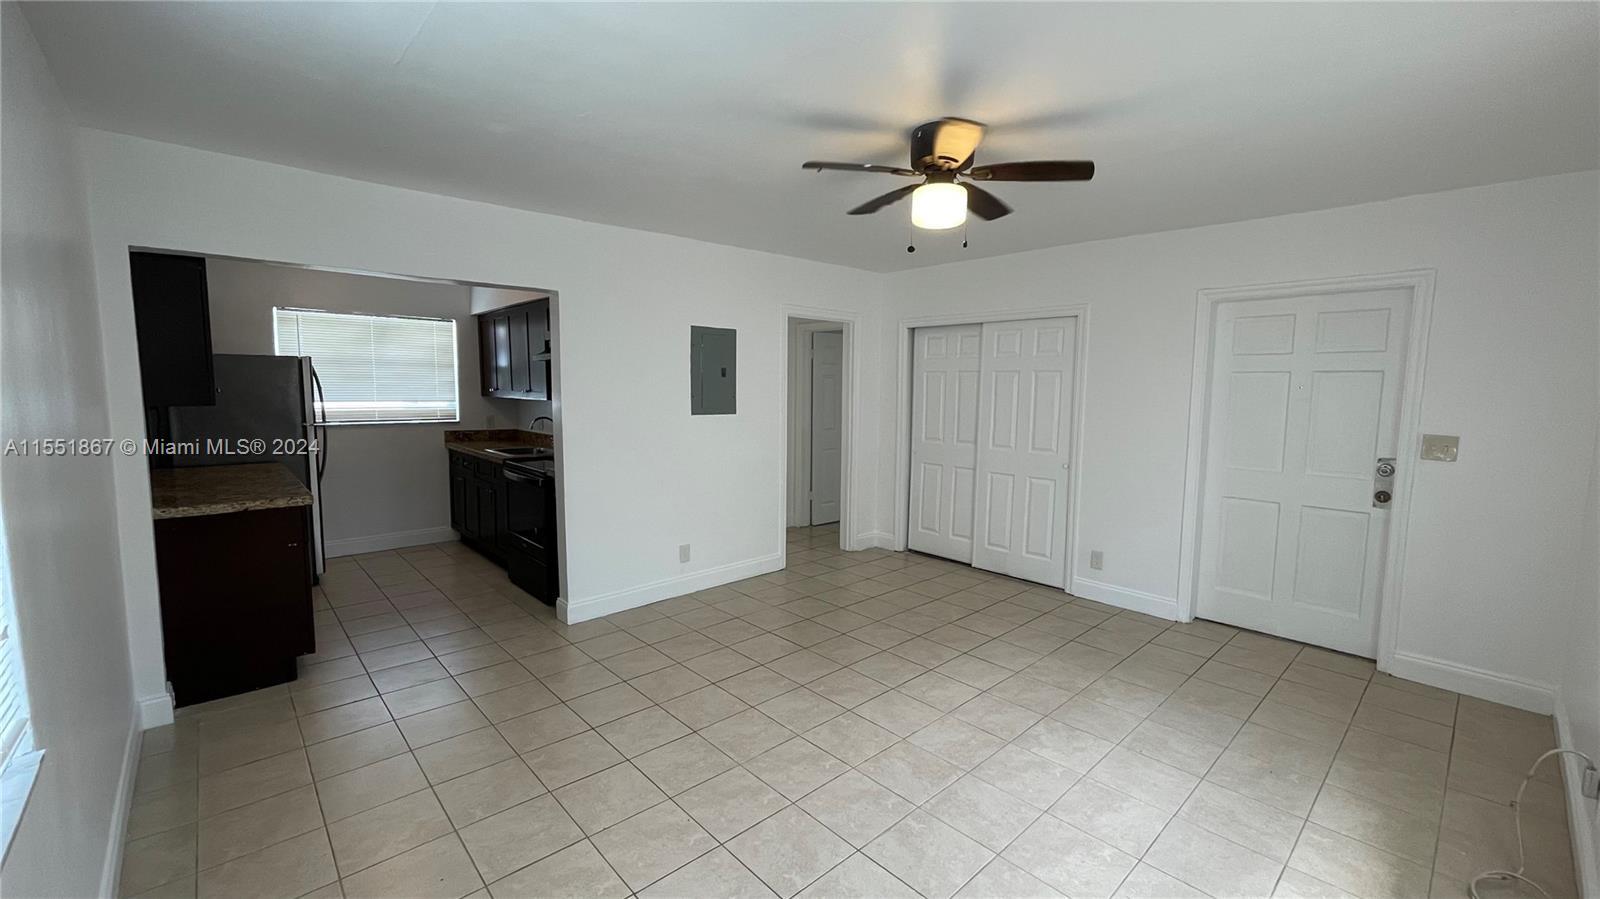 Photo of 5837 Pierce St #2 in Hollywood, FL